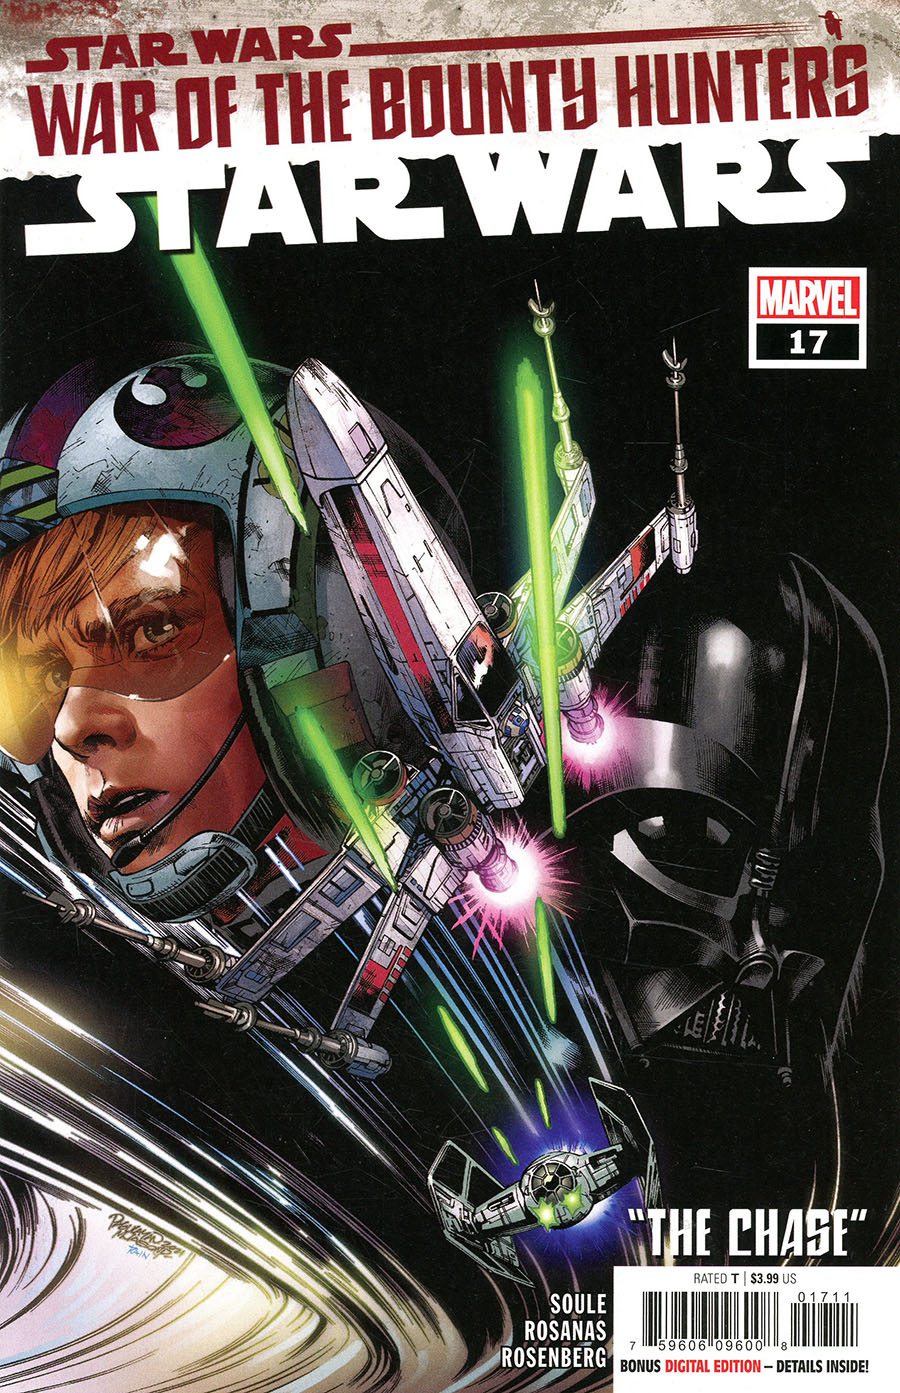 Star Wars Vol 5 #17 Cover A Regular Carlo Pagulayan Cover (War Of The Bounty Hunters Tie-In)